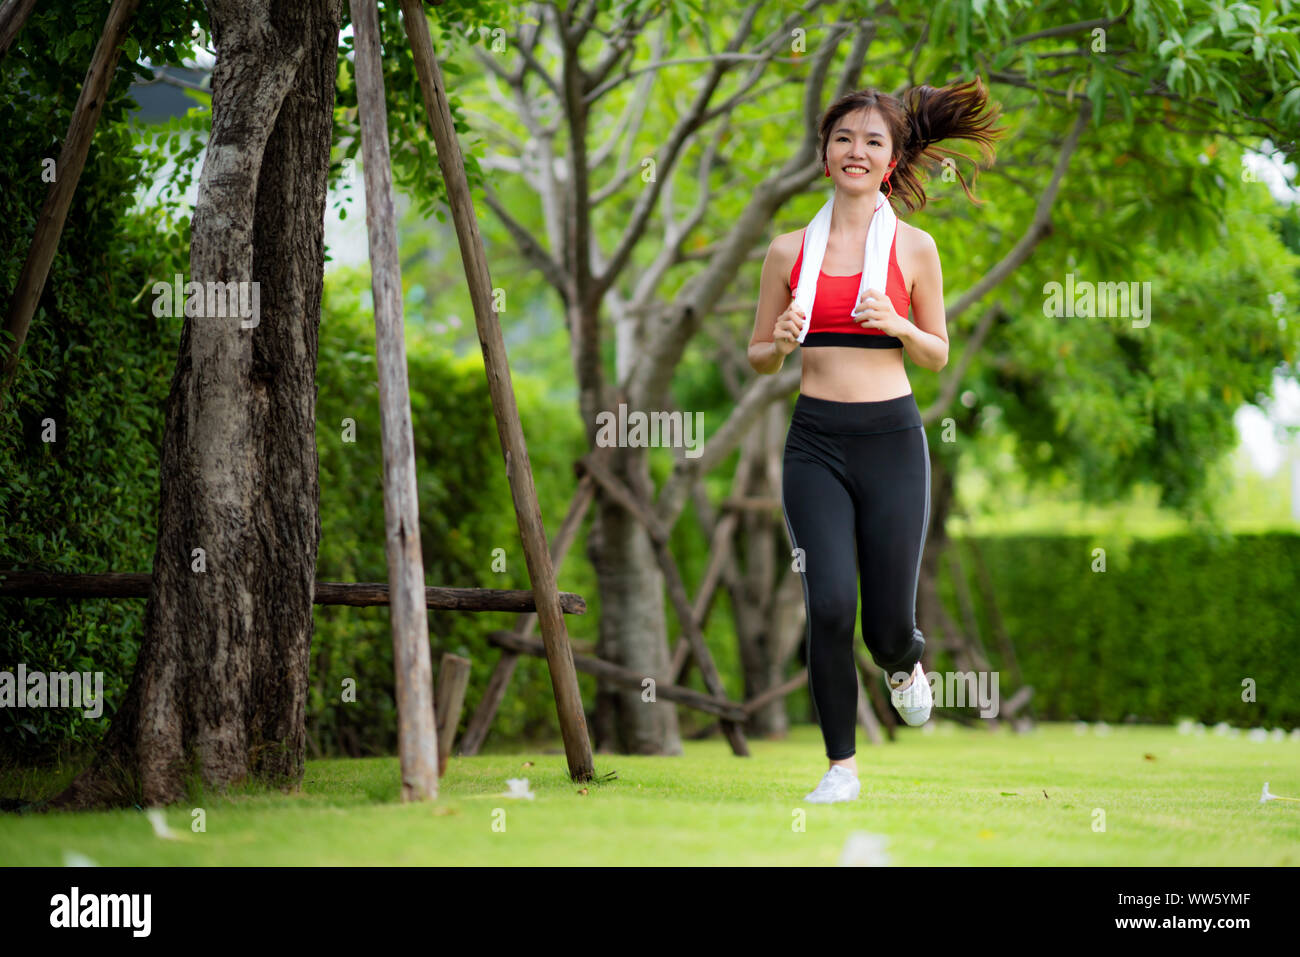 Jogging woman running in park in sunshine on beautiful summer day. Sport fitness model Asian ethnicity training outdoor for marathon. Stock Photo